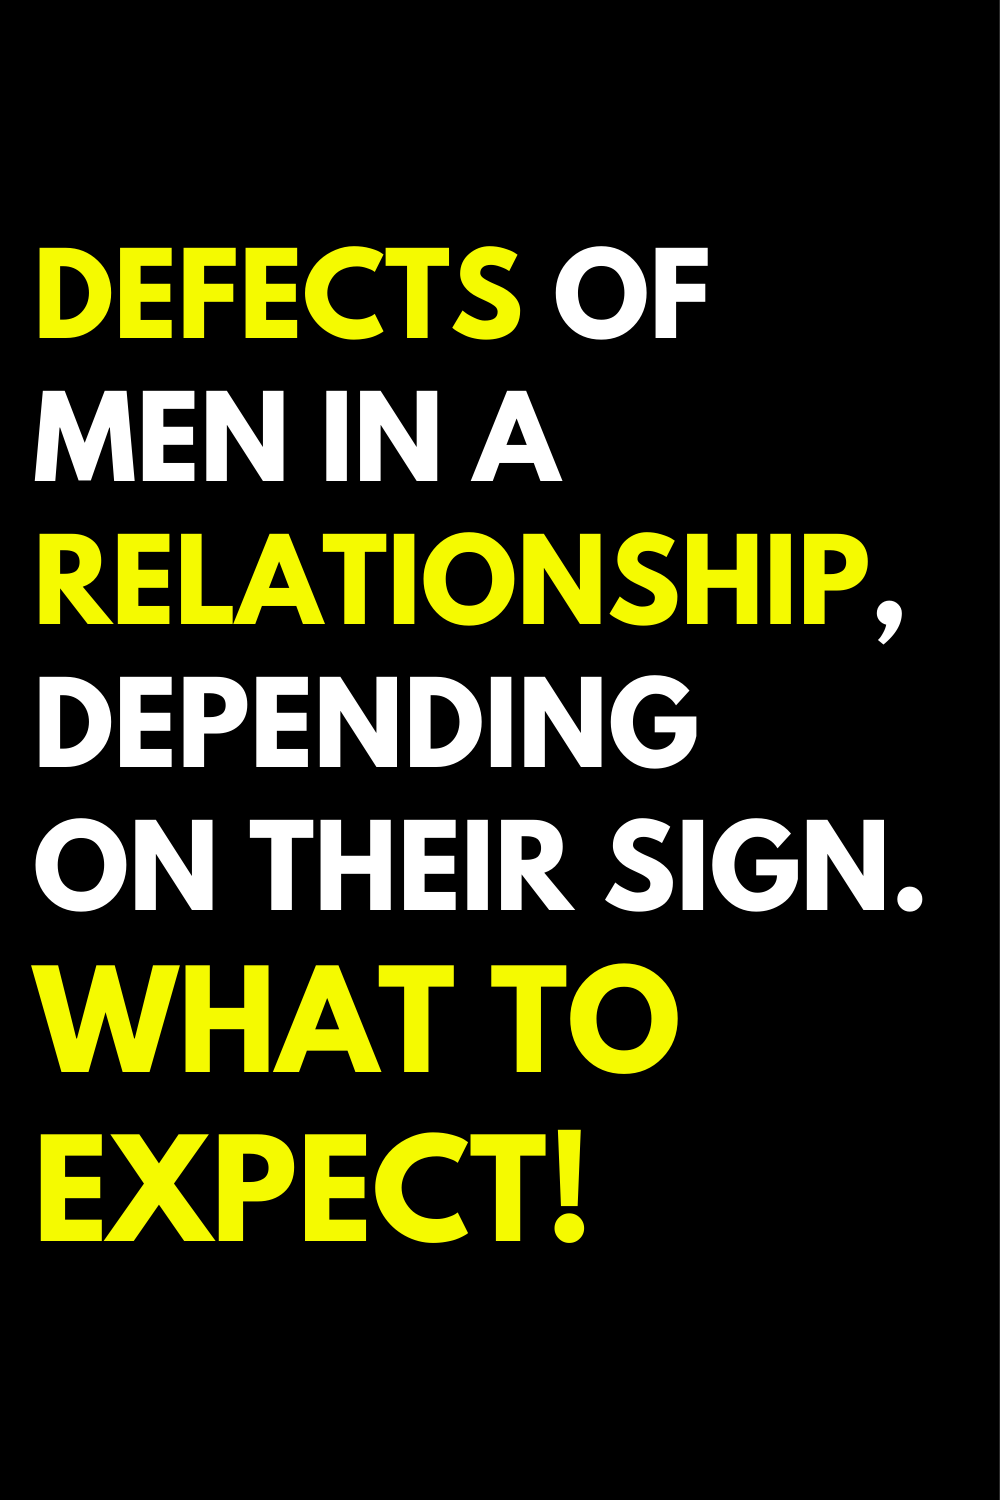 Defects of men in a relationship, depending on their sign. What to expect!